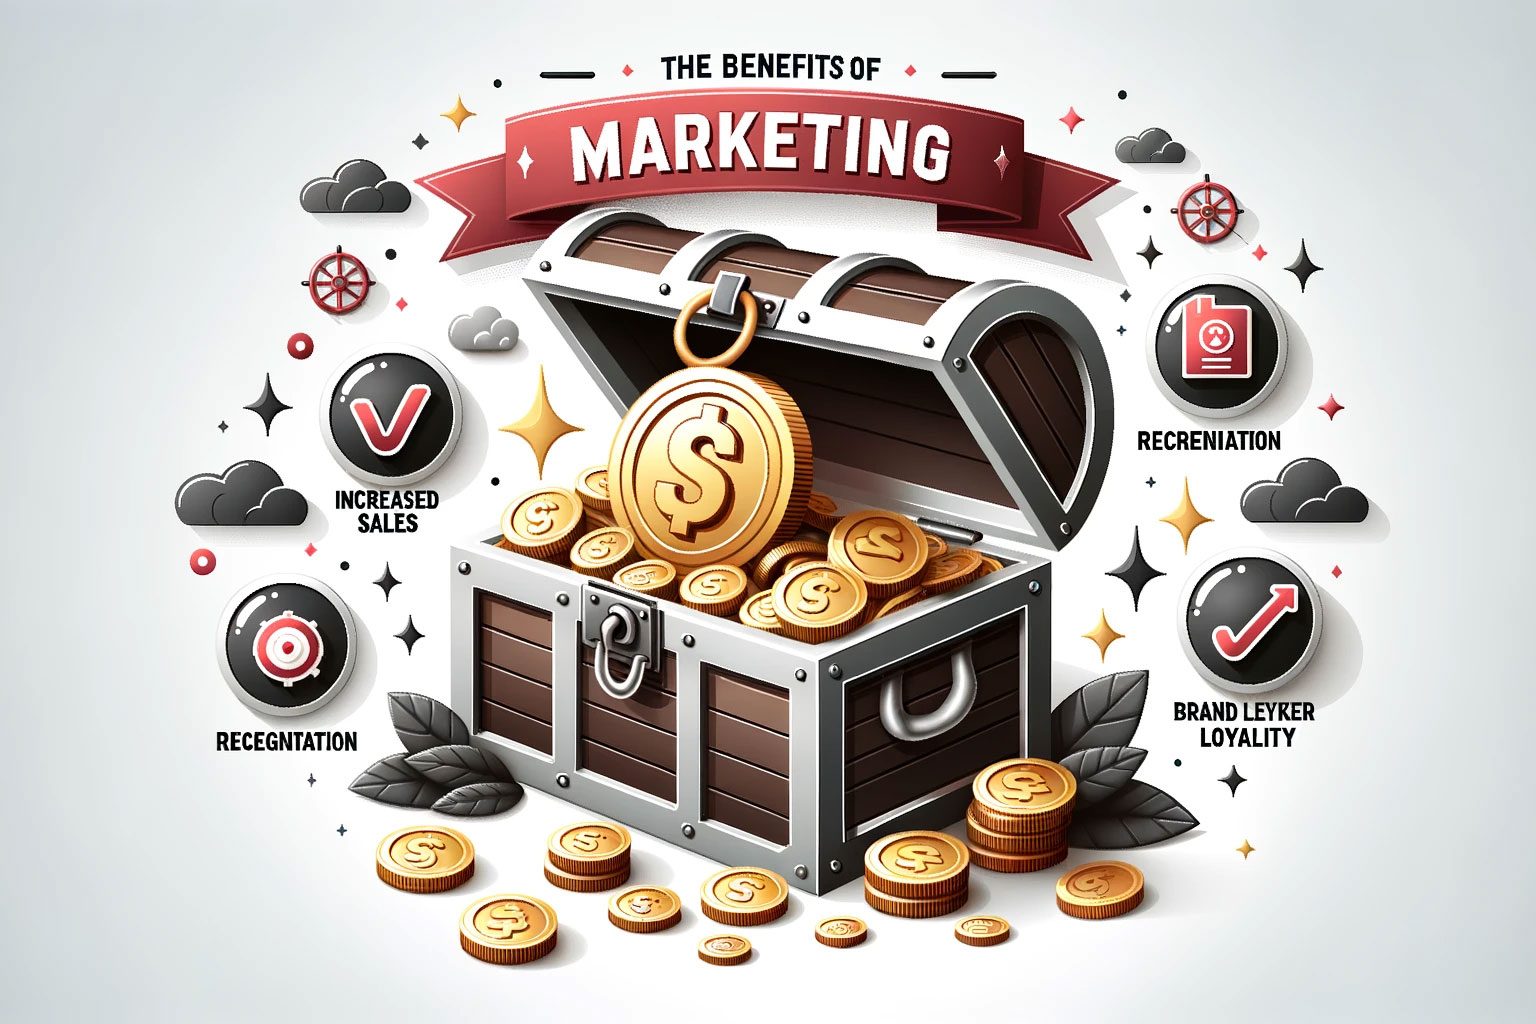 The Benefits of Marketing" with a treasure chest filled with benefits.